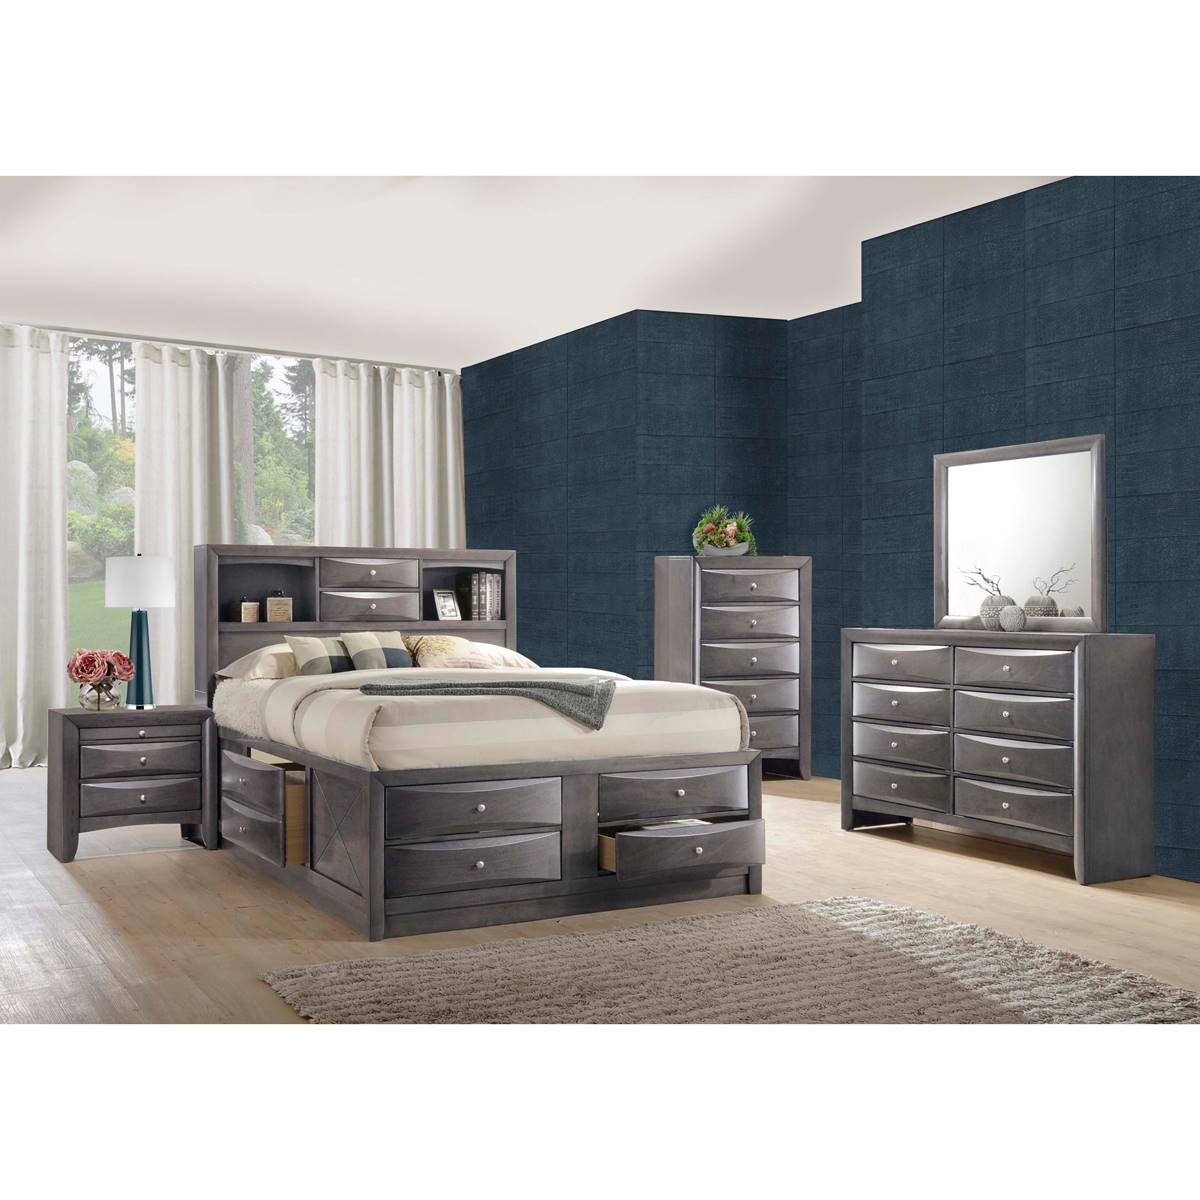 Elements Emily 2 Drawer Nightstand